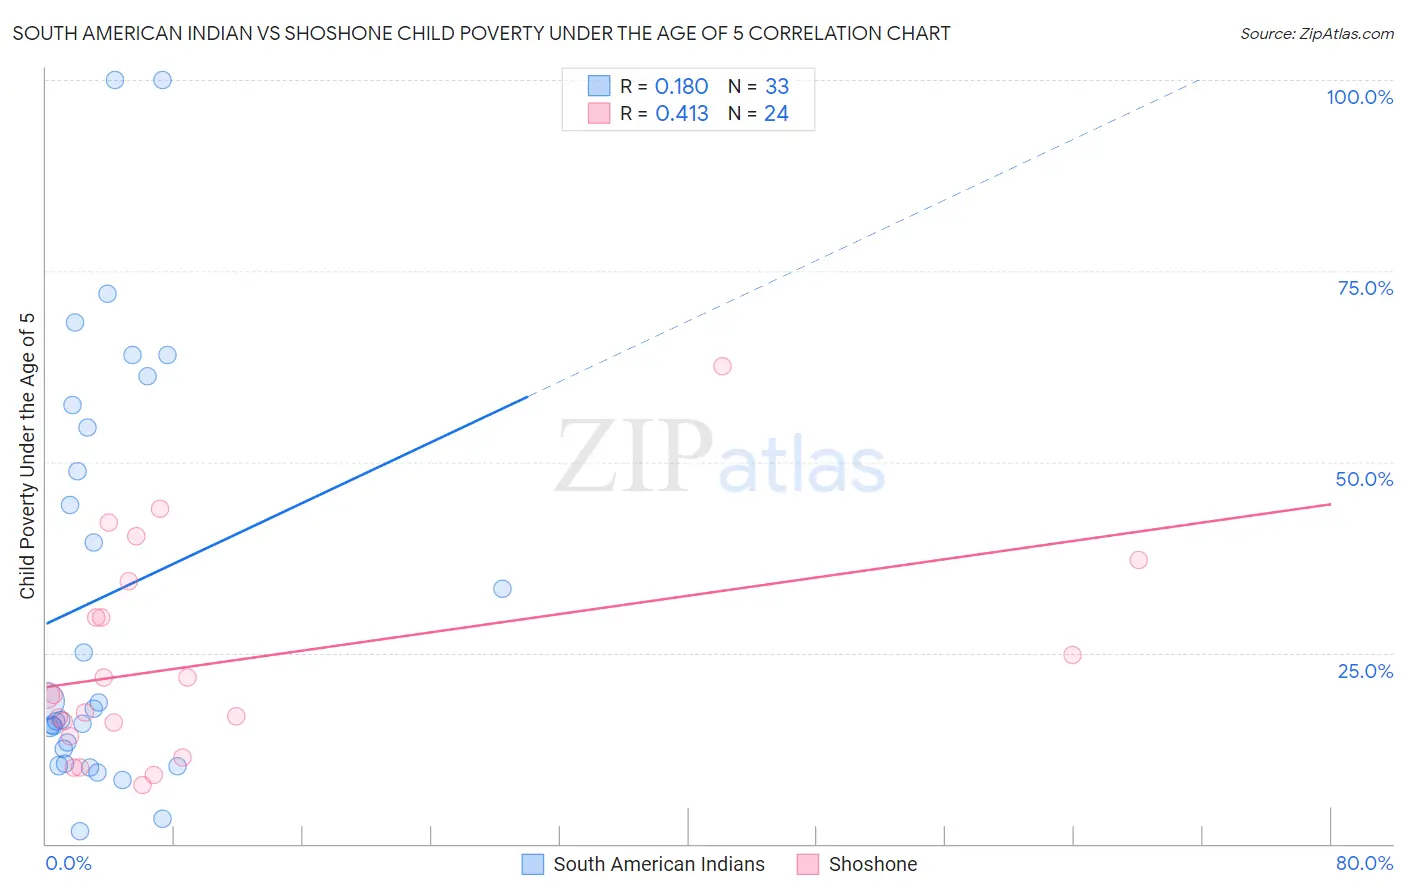 South American Indian vs Shoshone Child Poverty Under the Age of 5